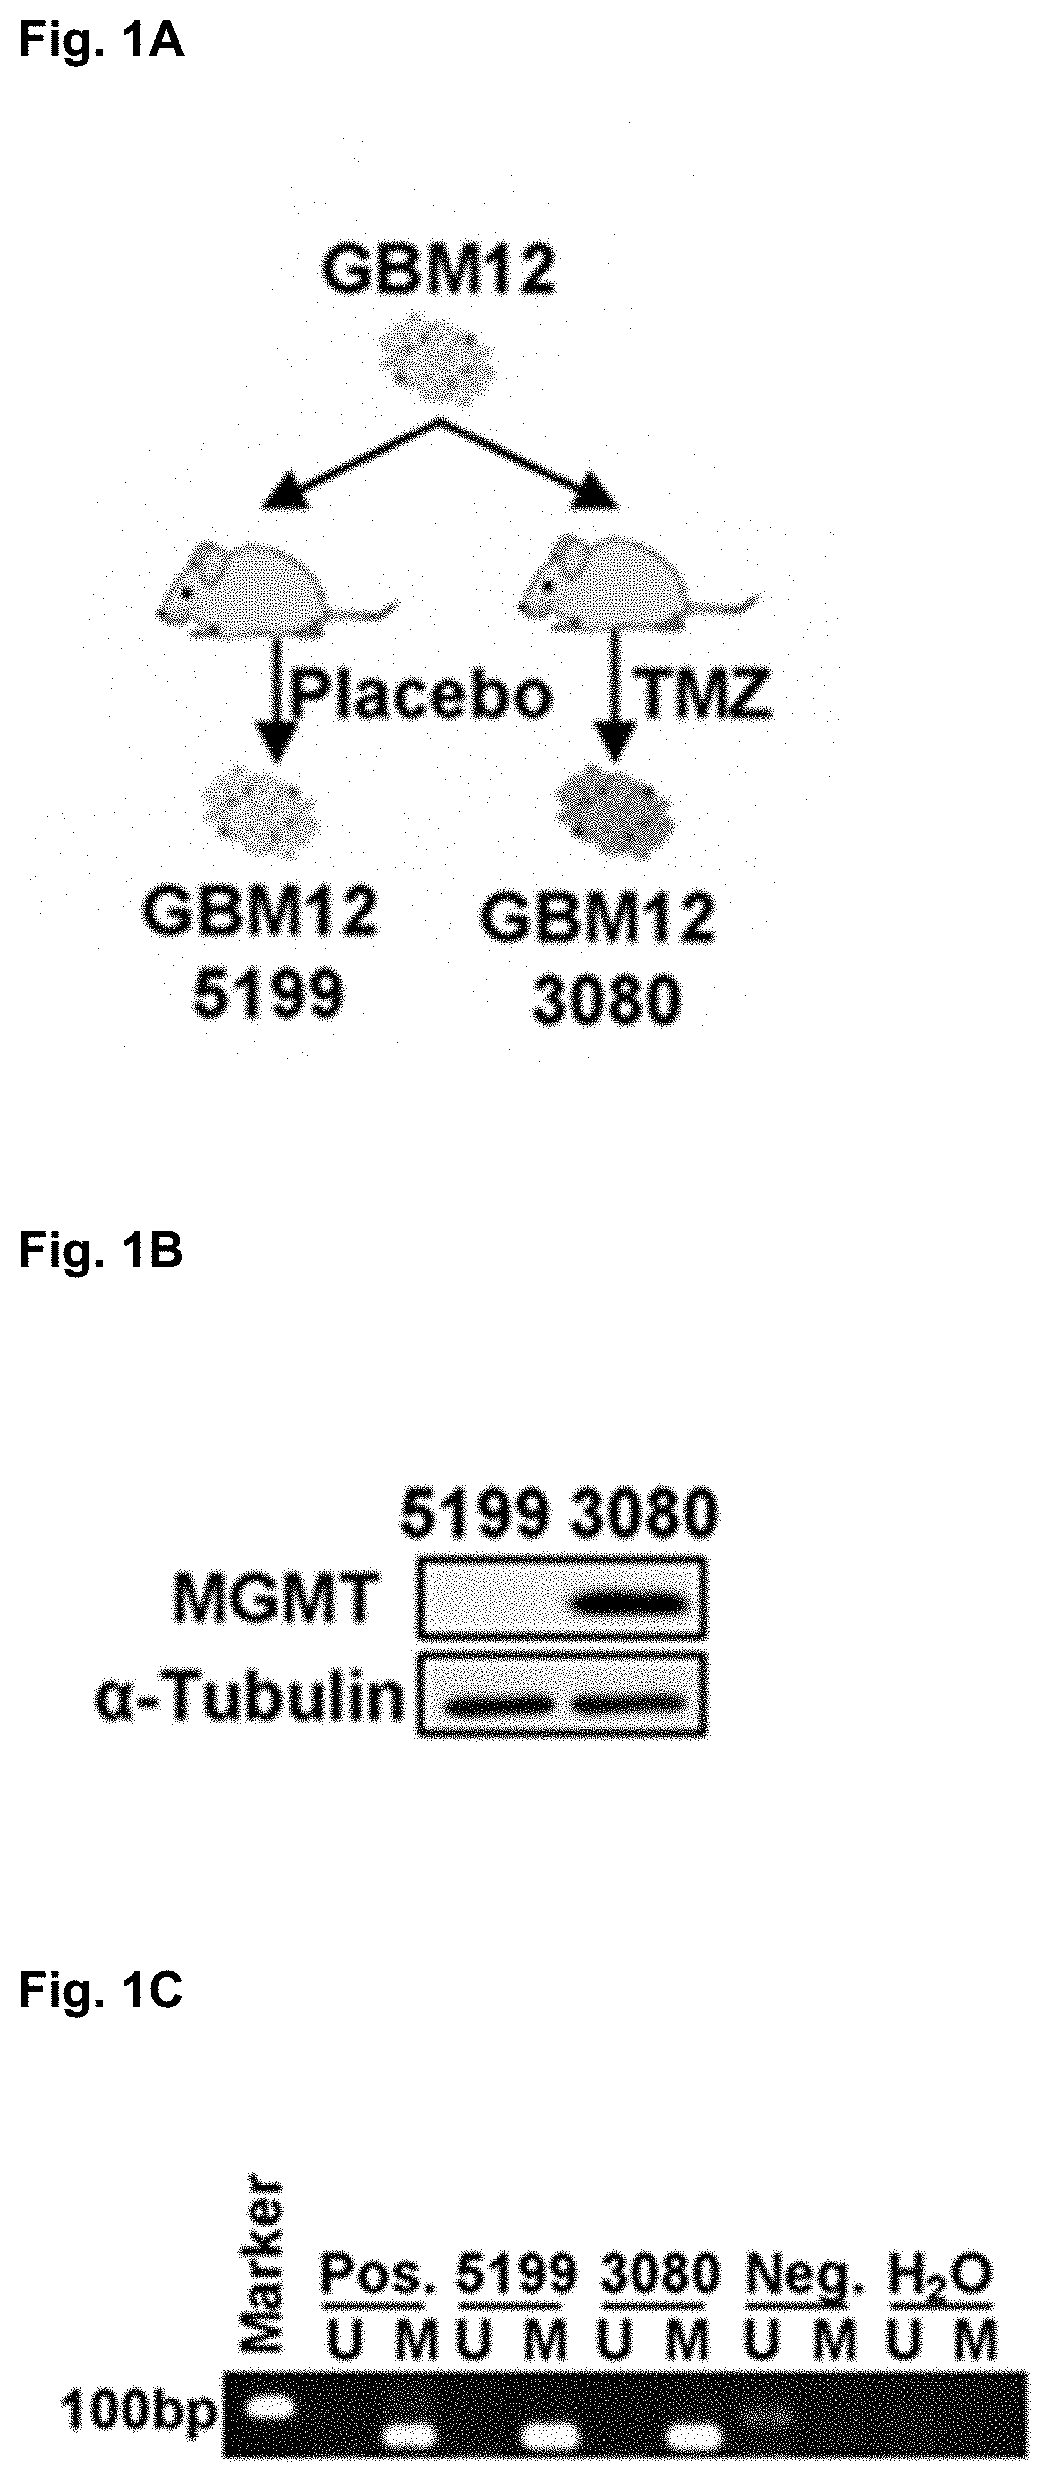 Compositions and methods for treating glioblastoma by modulating a mgmt enhancer